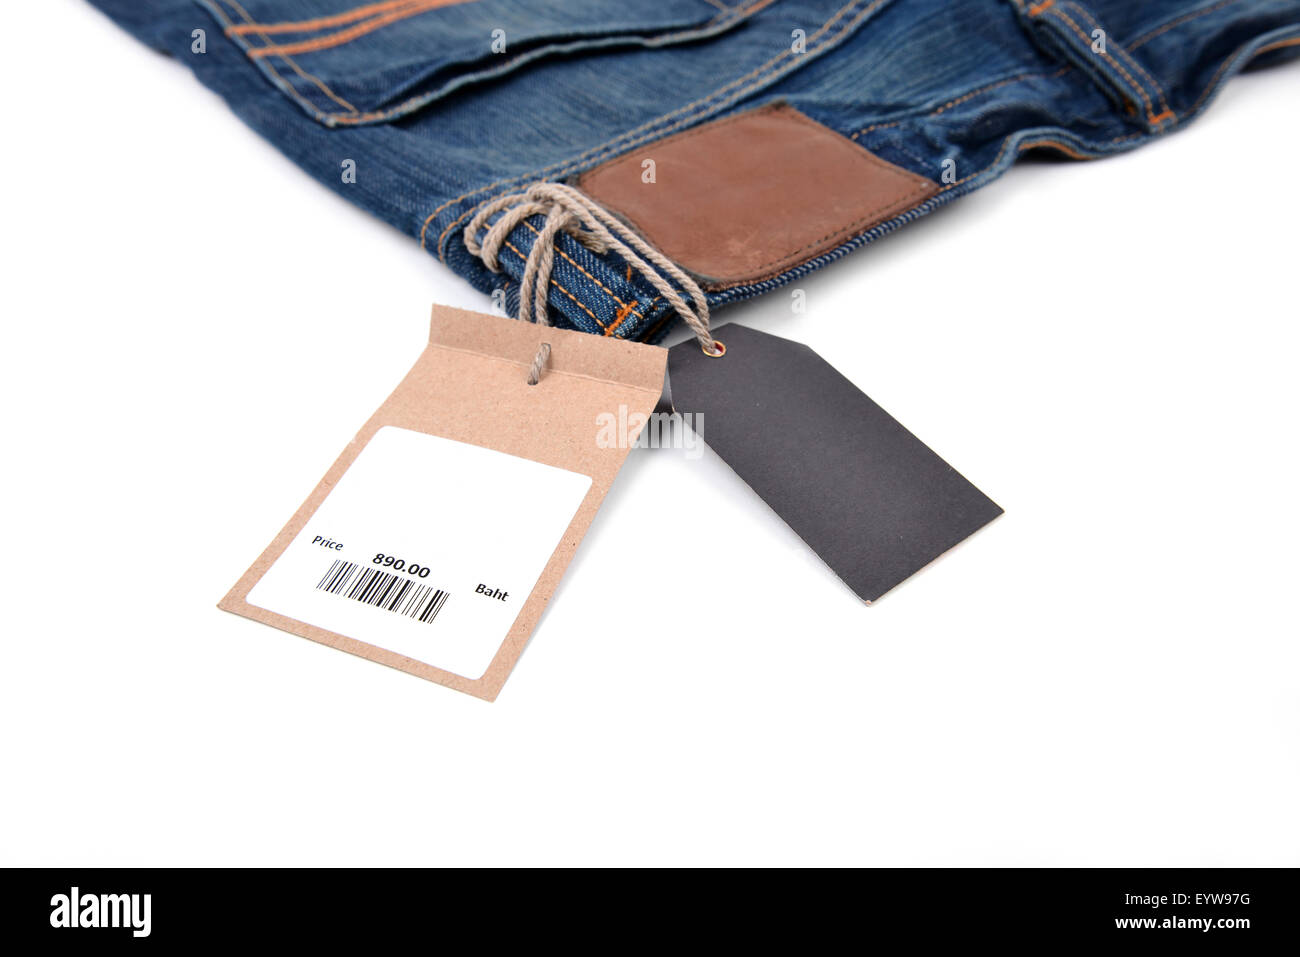 price tag with barcode on  jeans textured Stock Photo